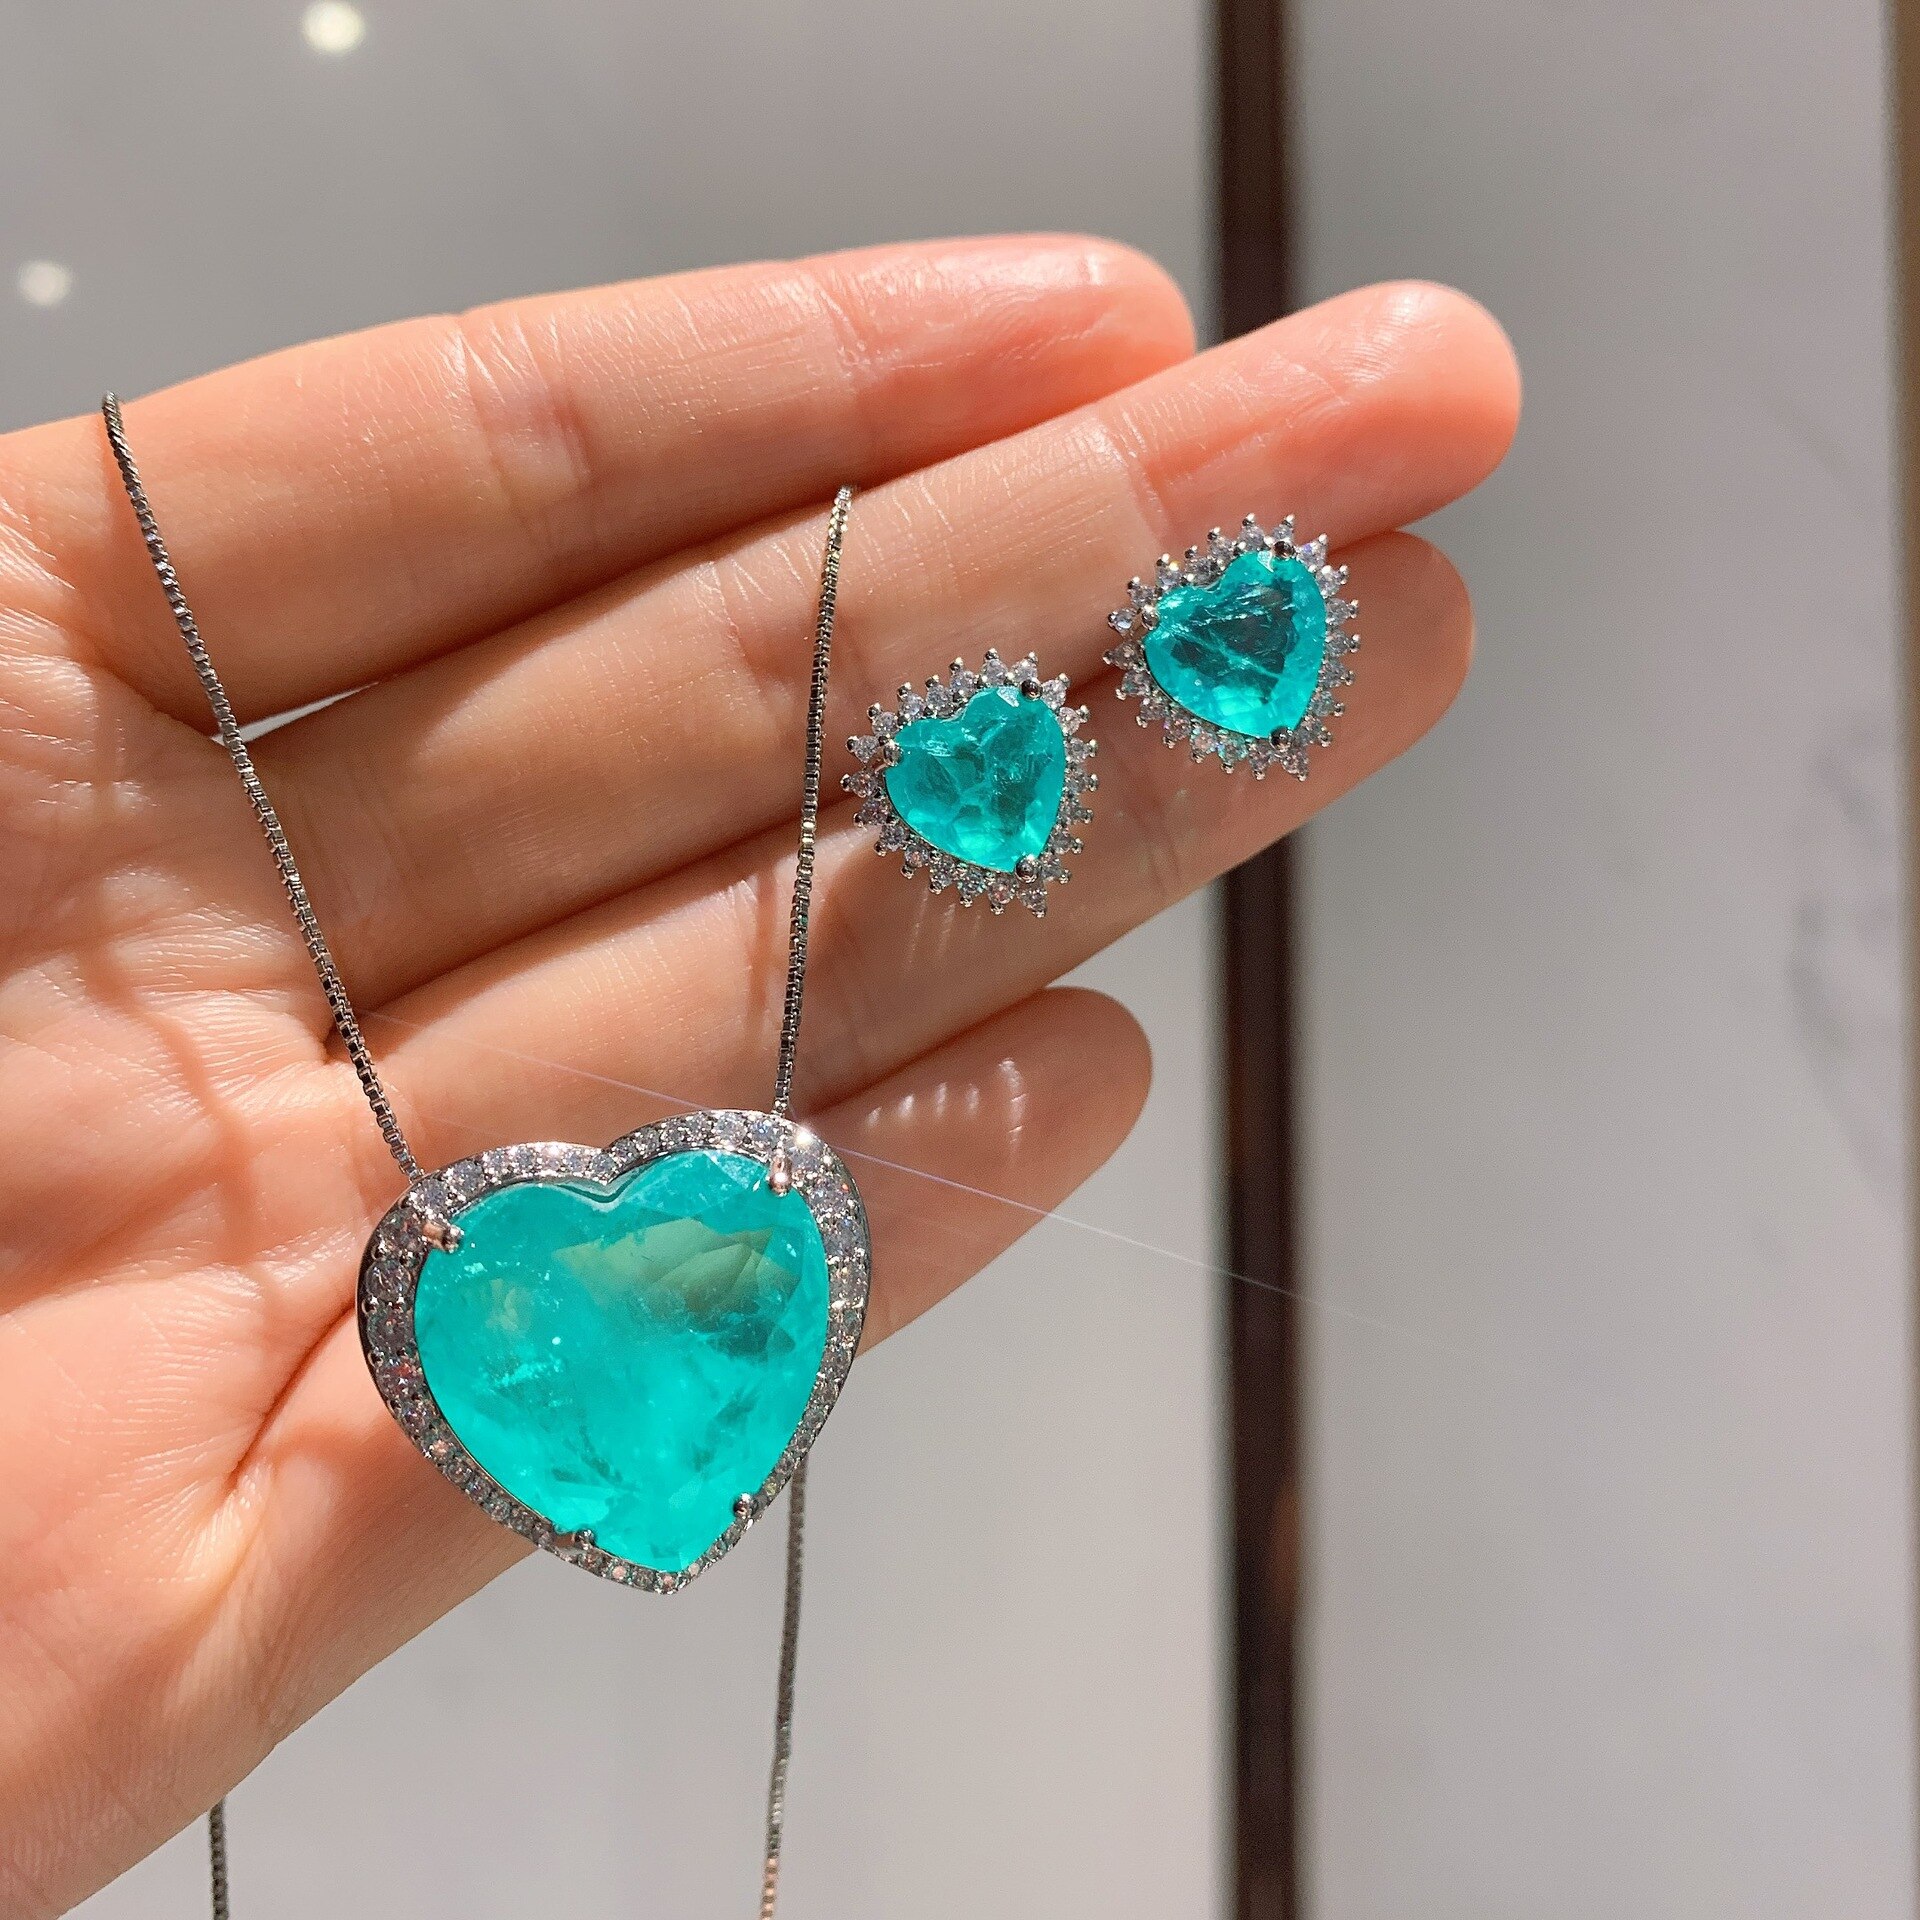 Luxury-Paraiba-Heart-Necklace-Earring-Brand-Set-Wedding-Dinner-Party-Jewelry-Anniversary-Gift-High-Quality-Fashion.jpg